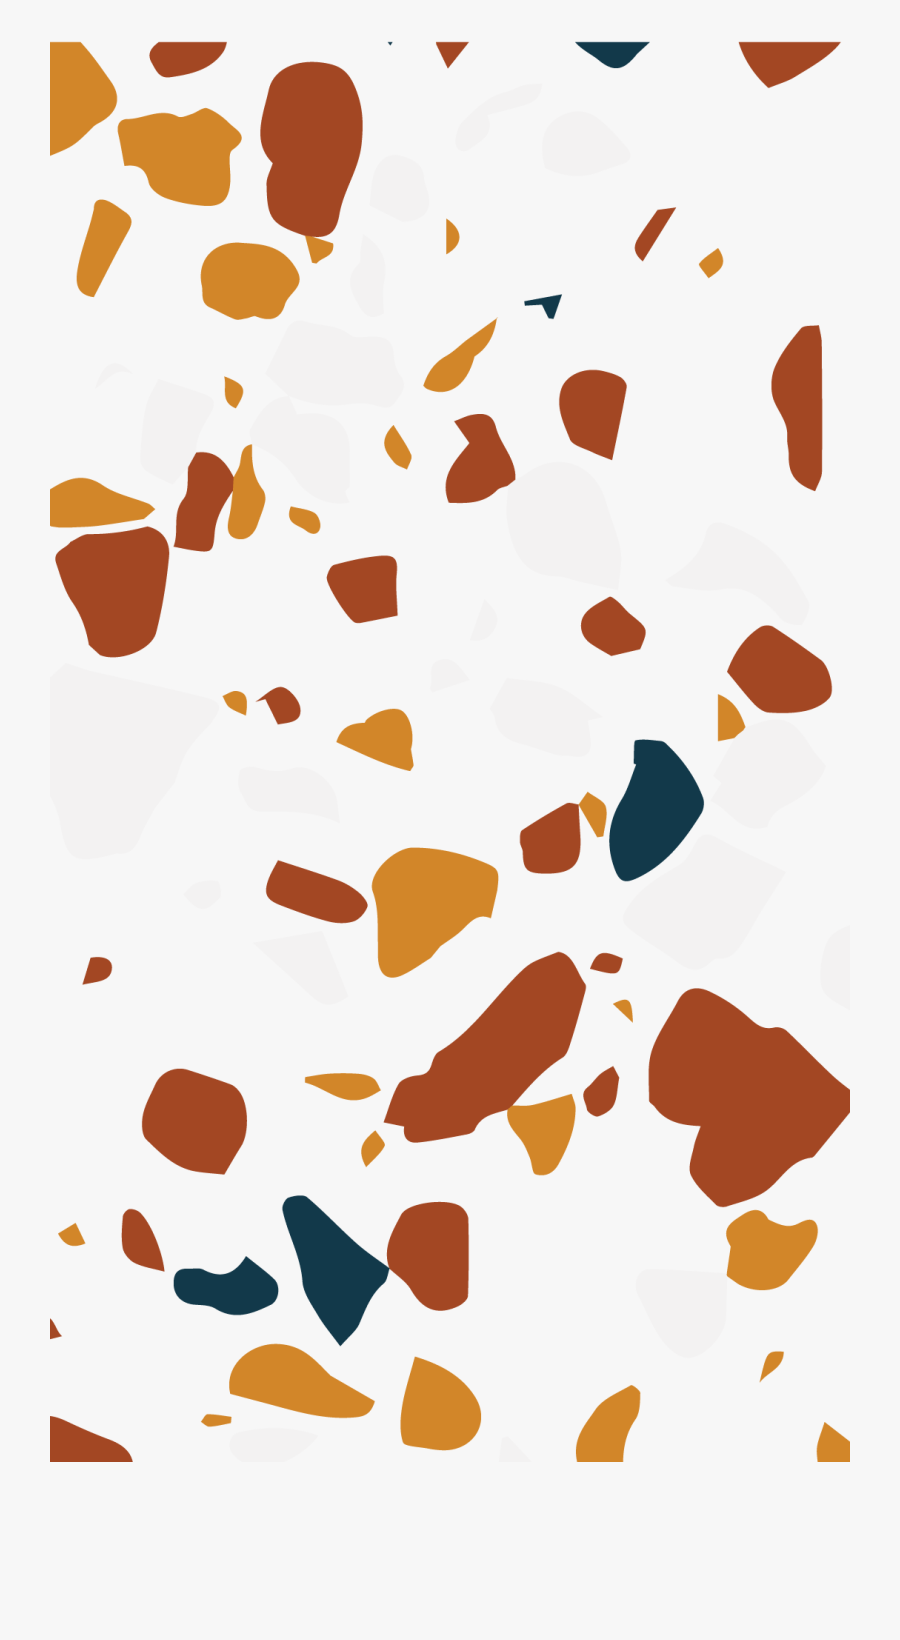 Download Free Vector Of Colorful Terrazzo Seamless,, Transparent Clipart